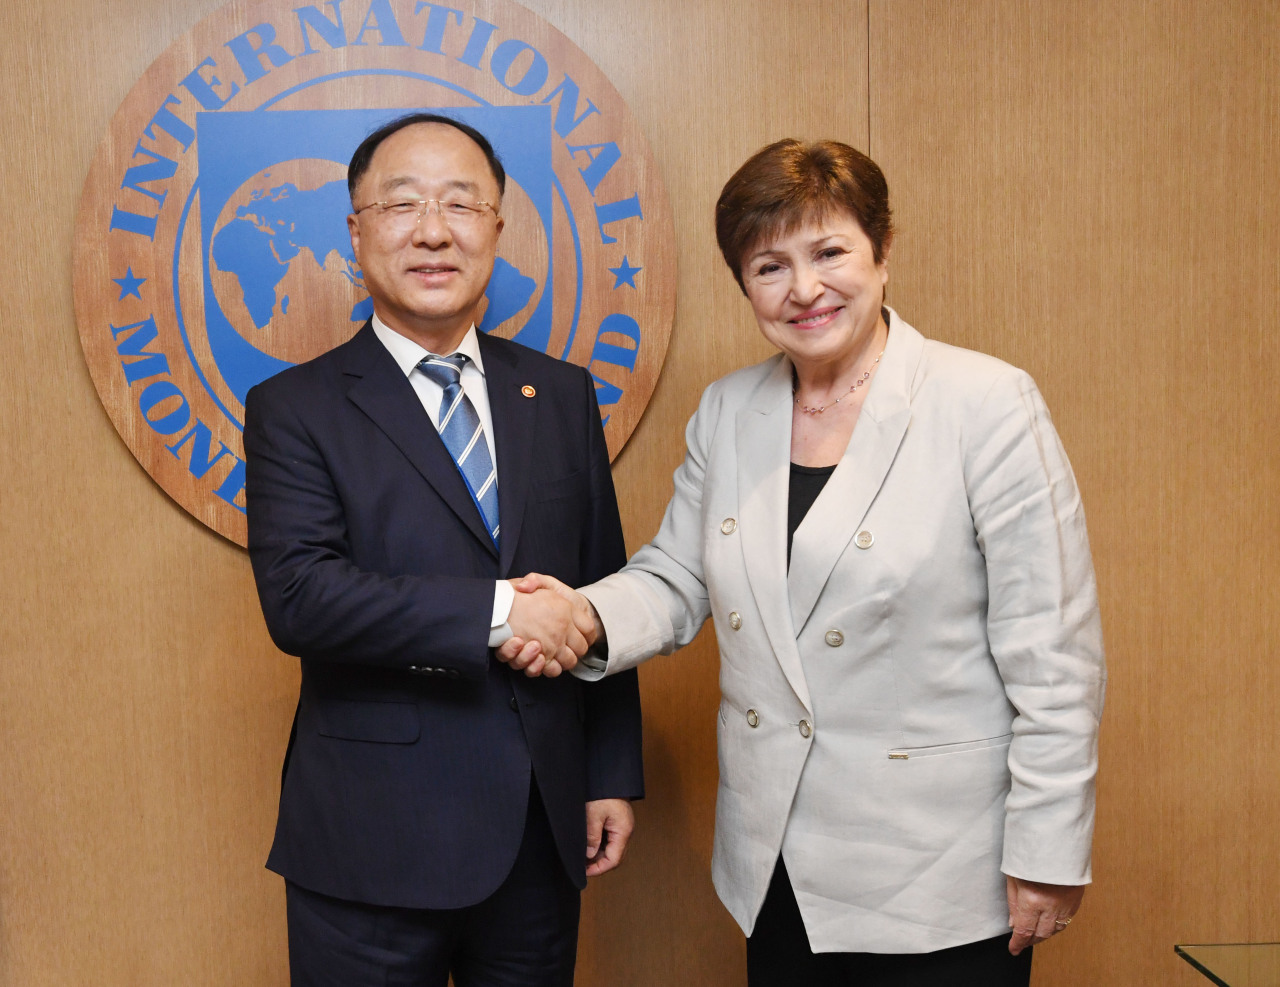 Korea’s Deputy Prime Minister and Finance Minister Hong Nam-ki (left) poses with International Monetary Fund Managing Director Kristalina Georgieva at the IMF headquarters in Washington, D.C. on Tuesday. (Ministry of Finance and Economy)